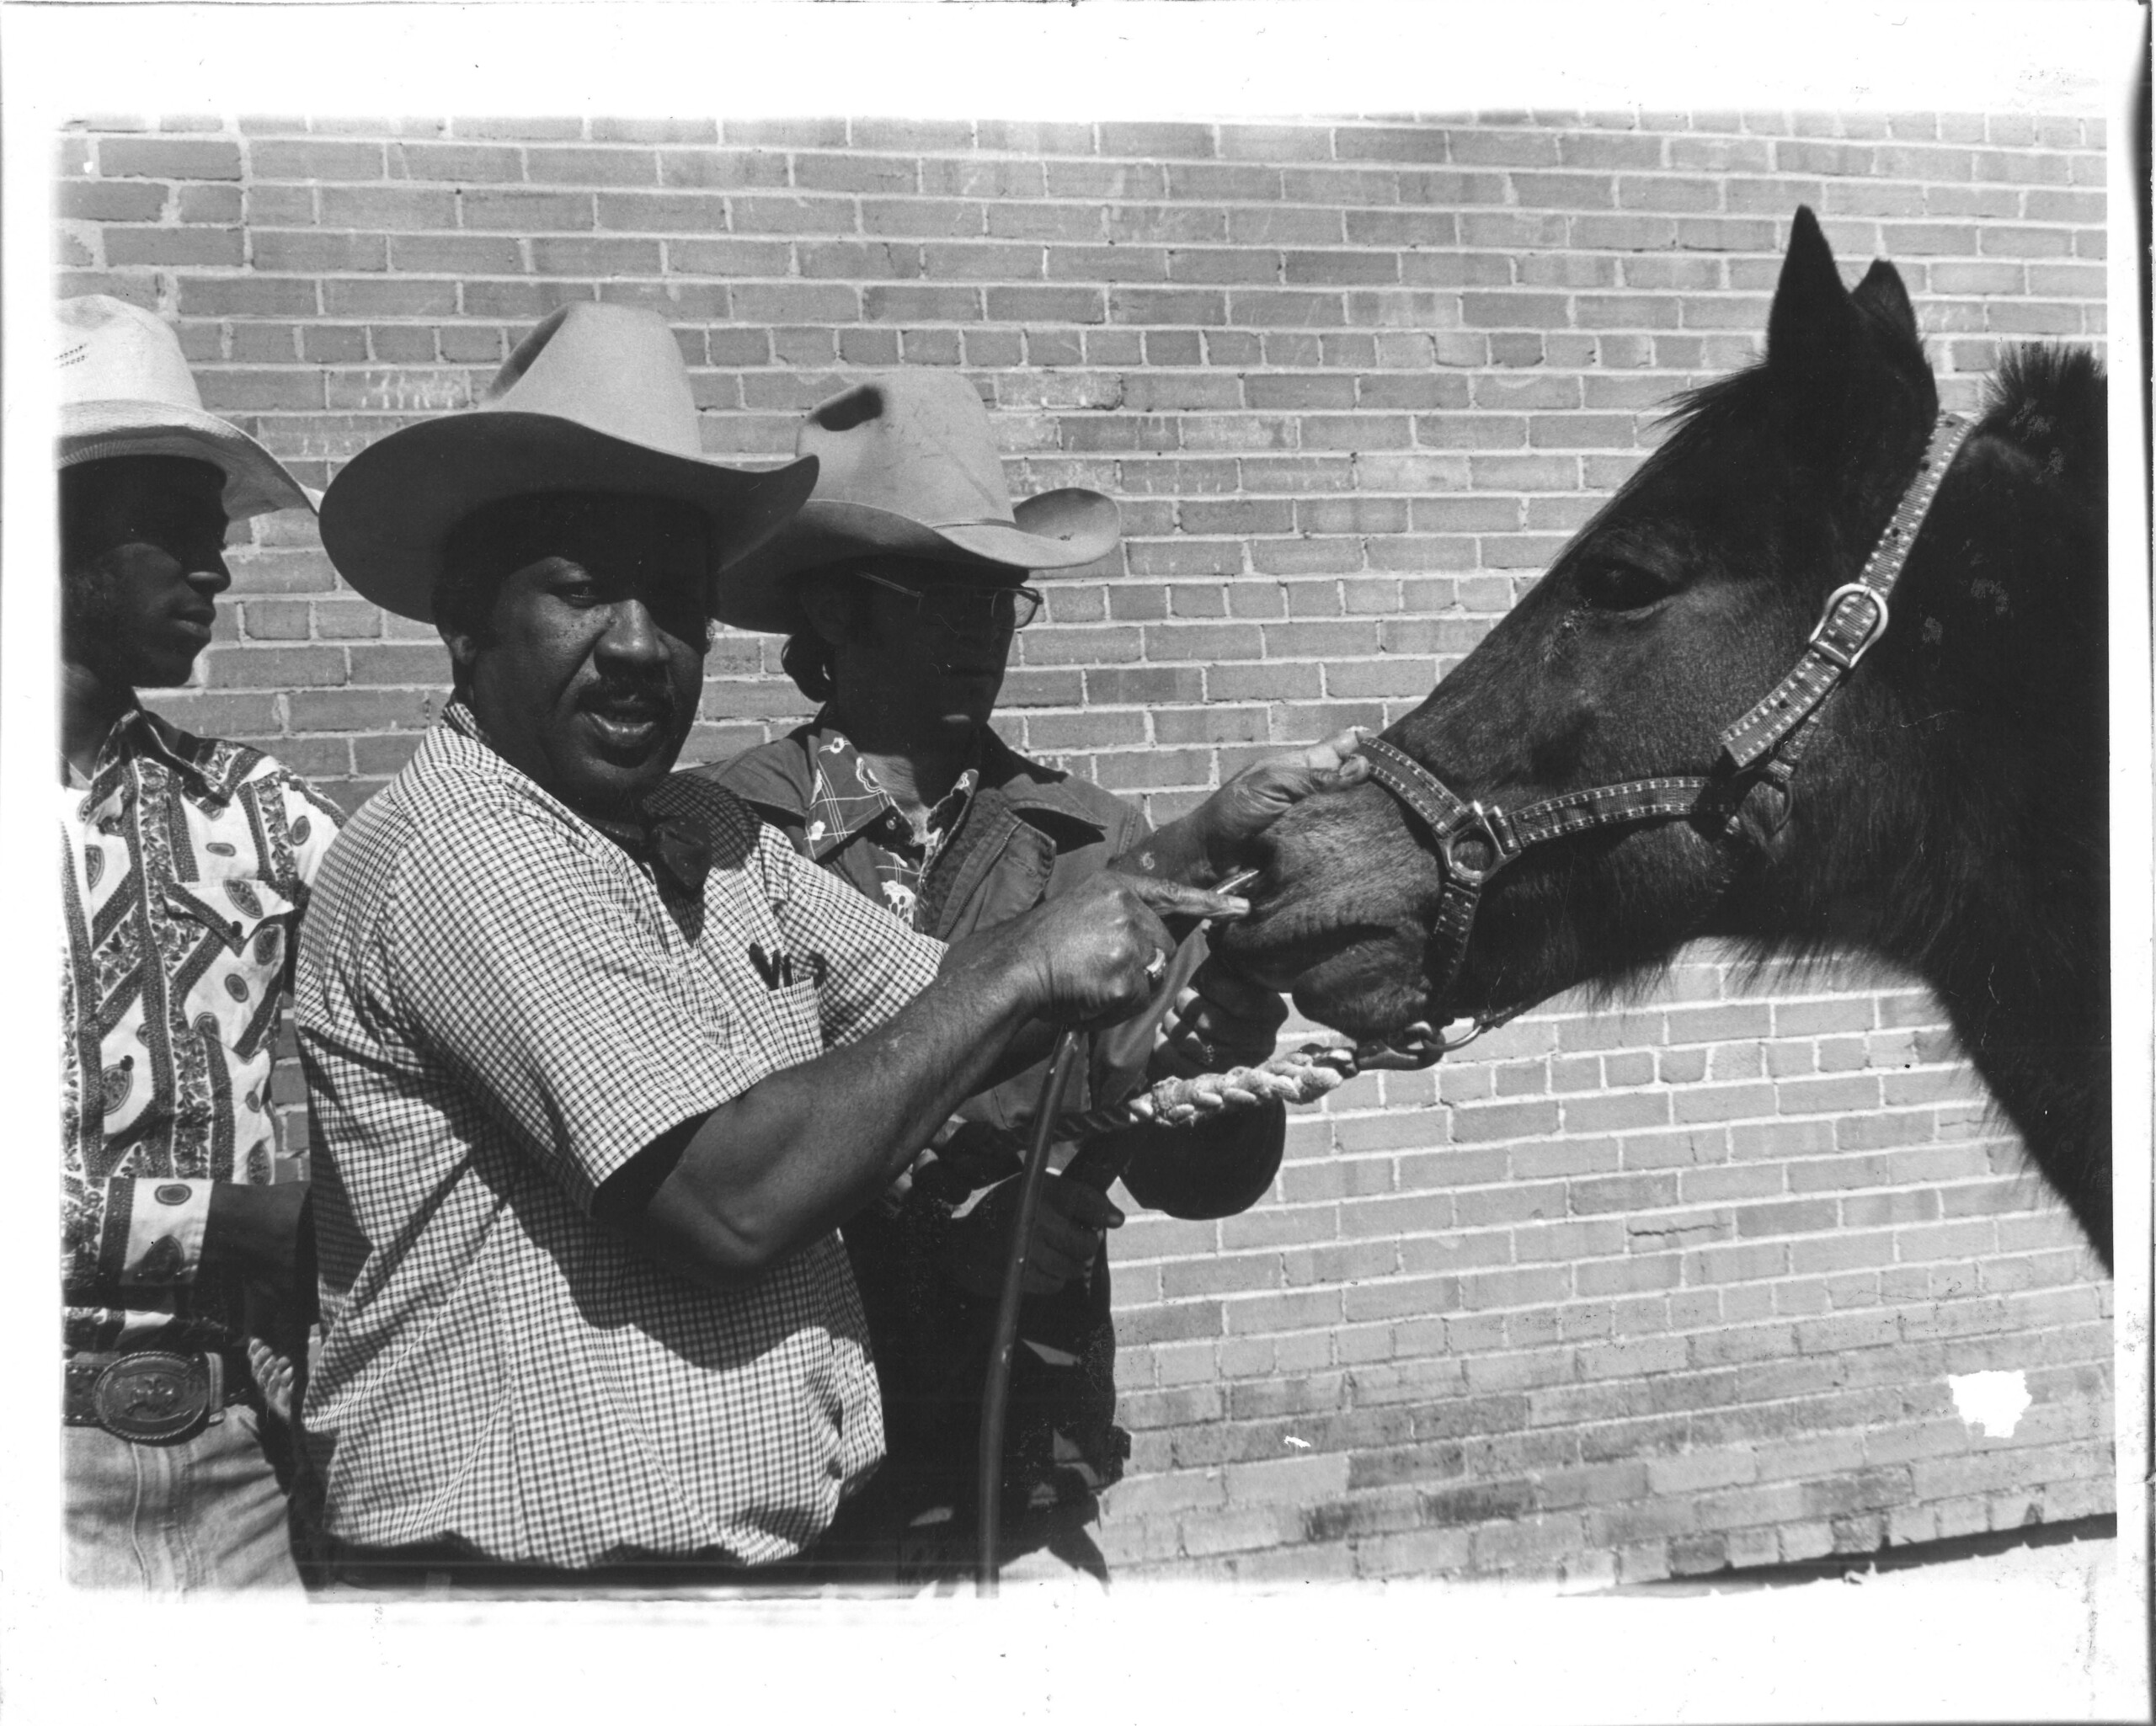 Dr. Poindexter performing an intranasal procedure on horse with 2 men observing.